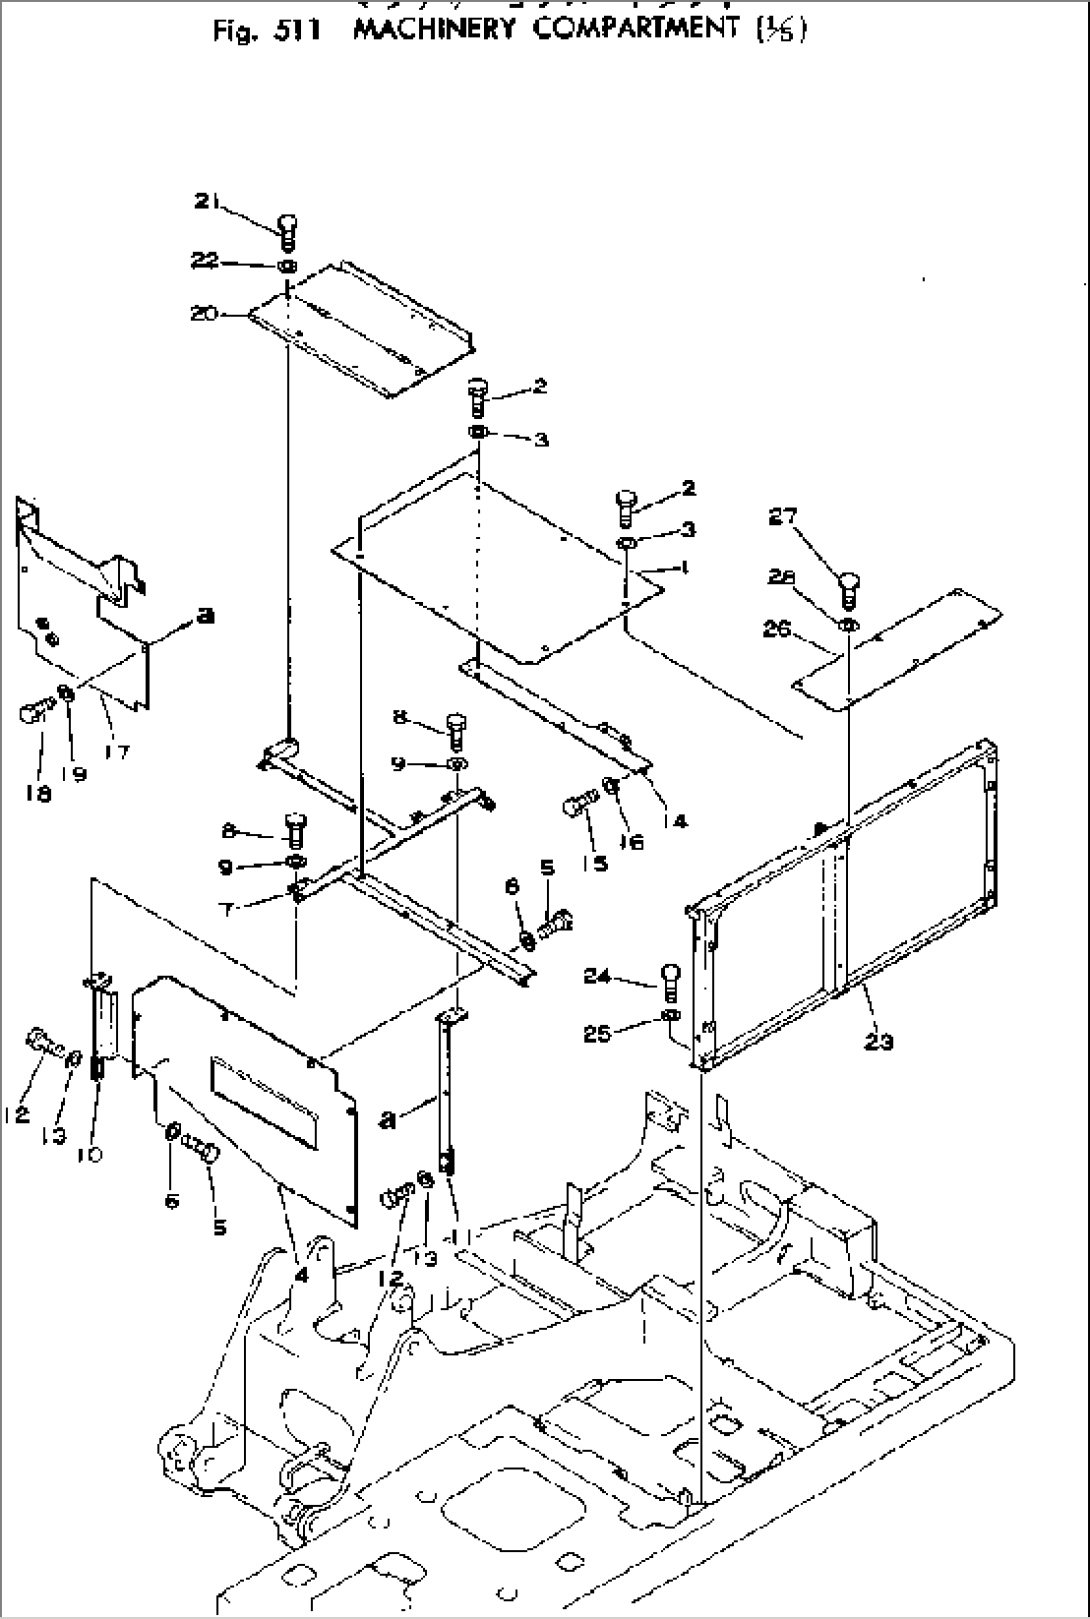 MACHINERY COMPARTMENT (1/5)